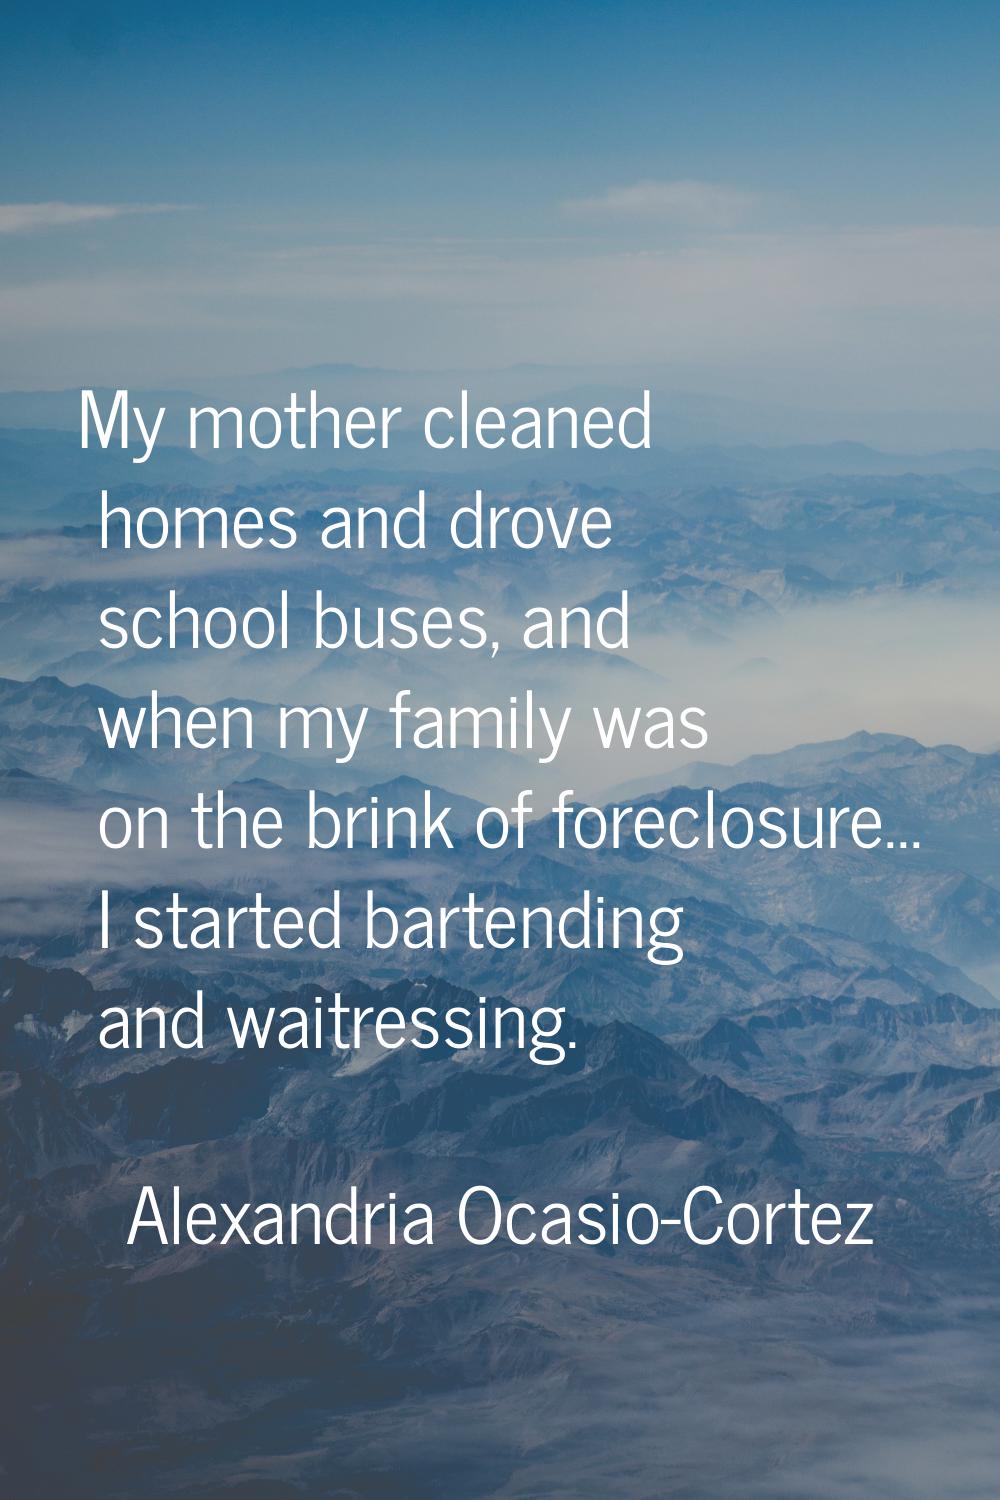 My mother cleaned homes and drove school buses, and when my family was on the brink of foreclosure.